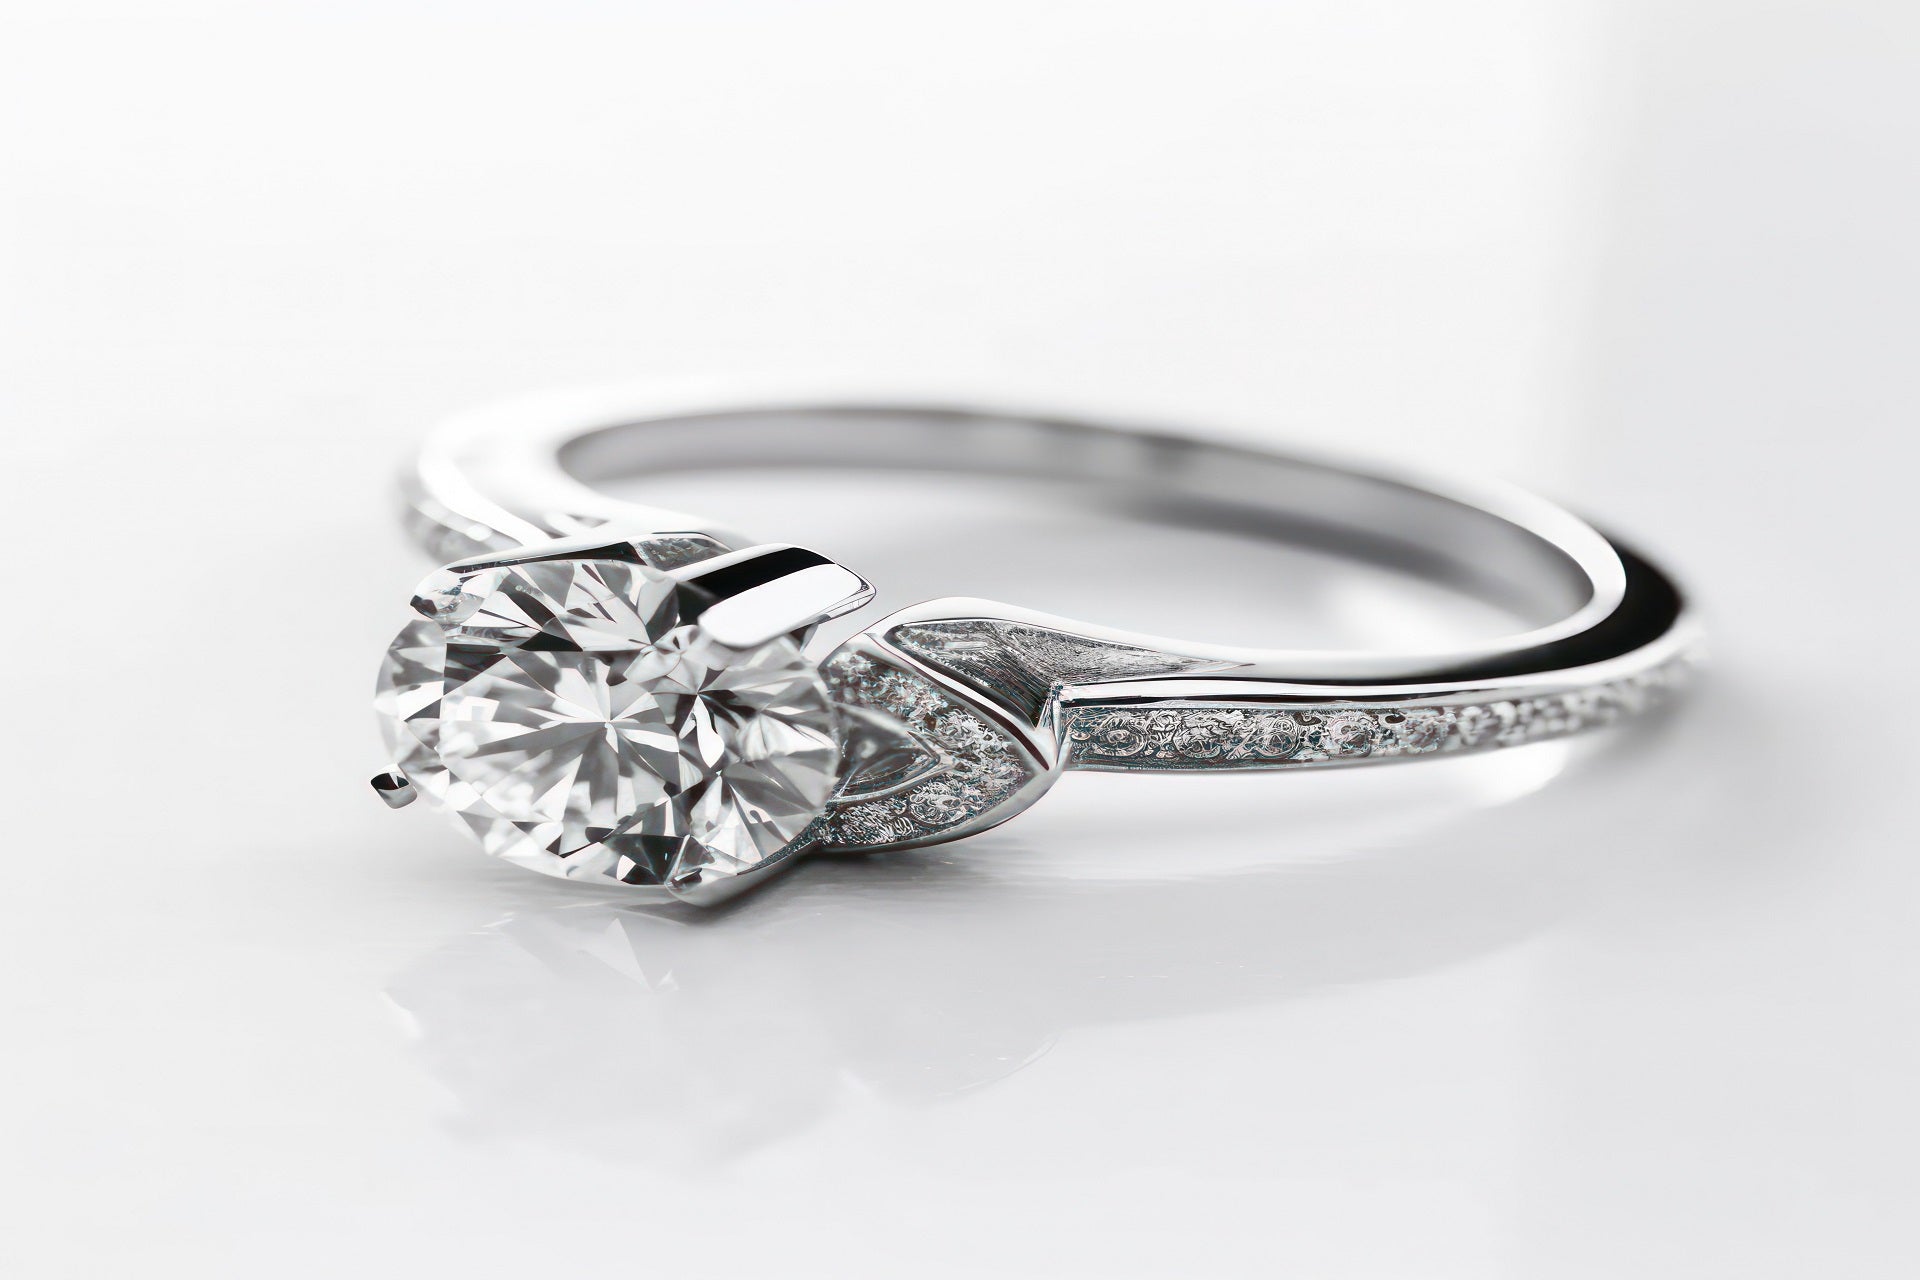 Solitaire Diamond Engagement Rings and Other Types of Engagement Rings